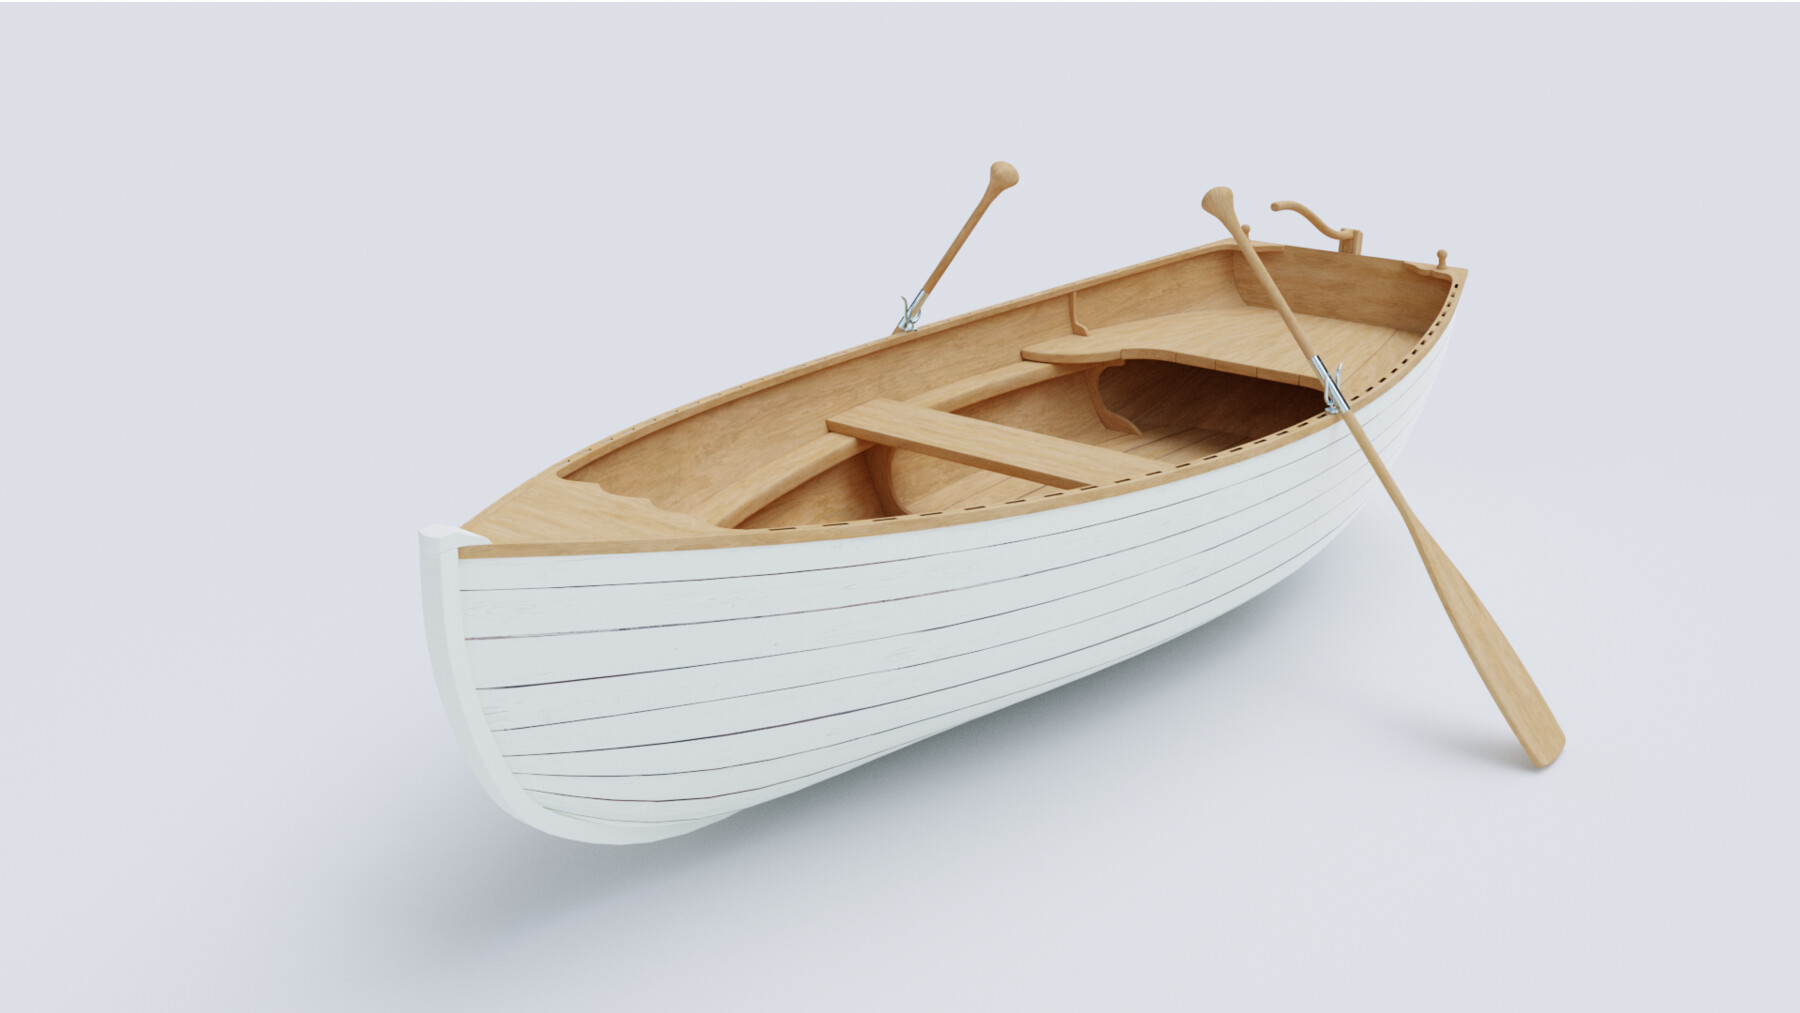 9,283 Wooden Boat Model Images, Stock Photos, 3D objects